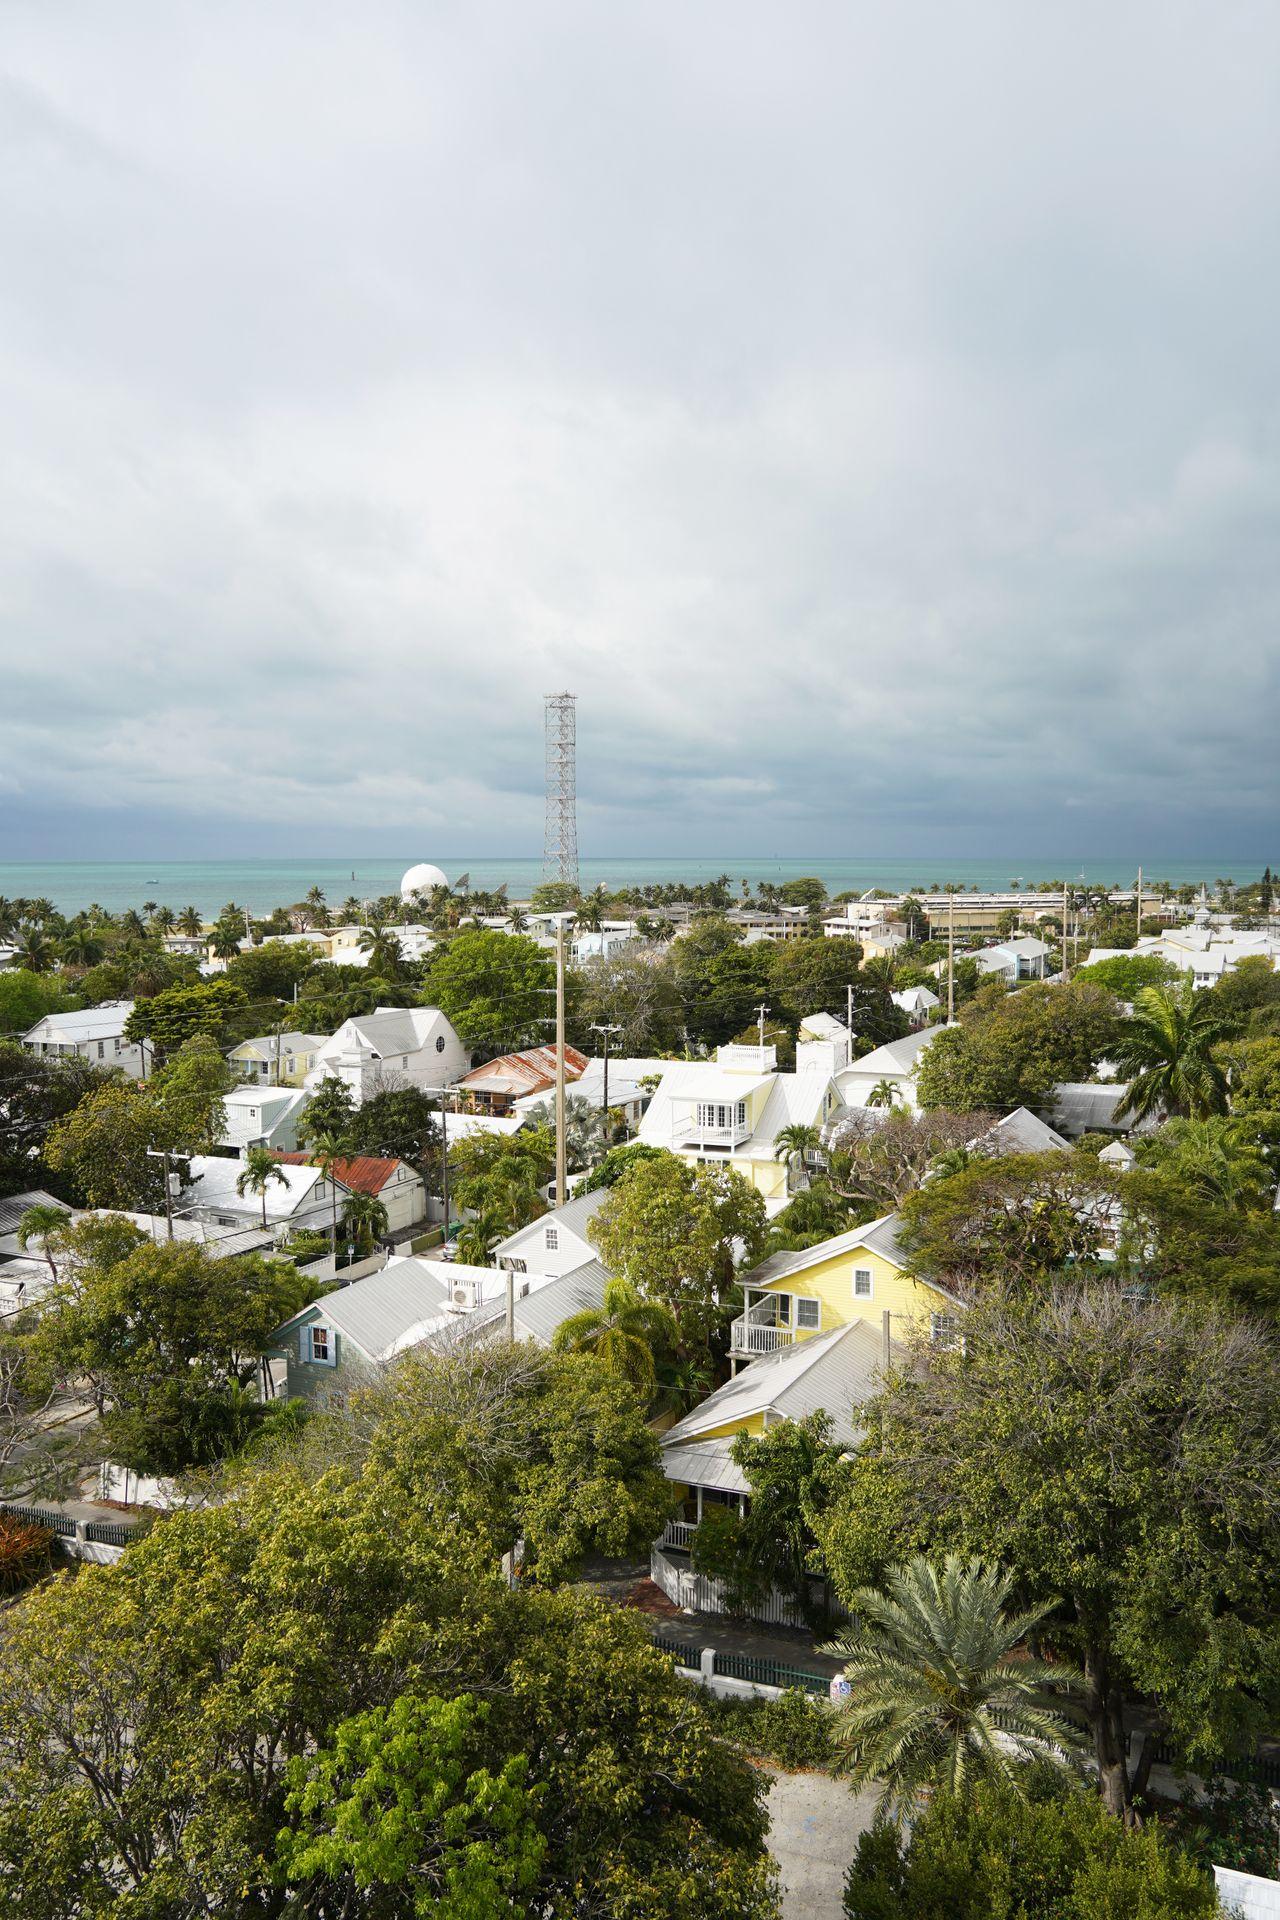 The view of Key West from the top of the lighthouse. There are white and yellow houses, trees and the ocean in the background